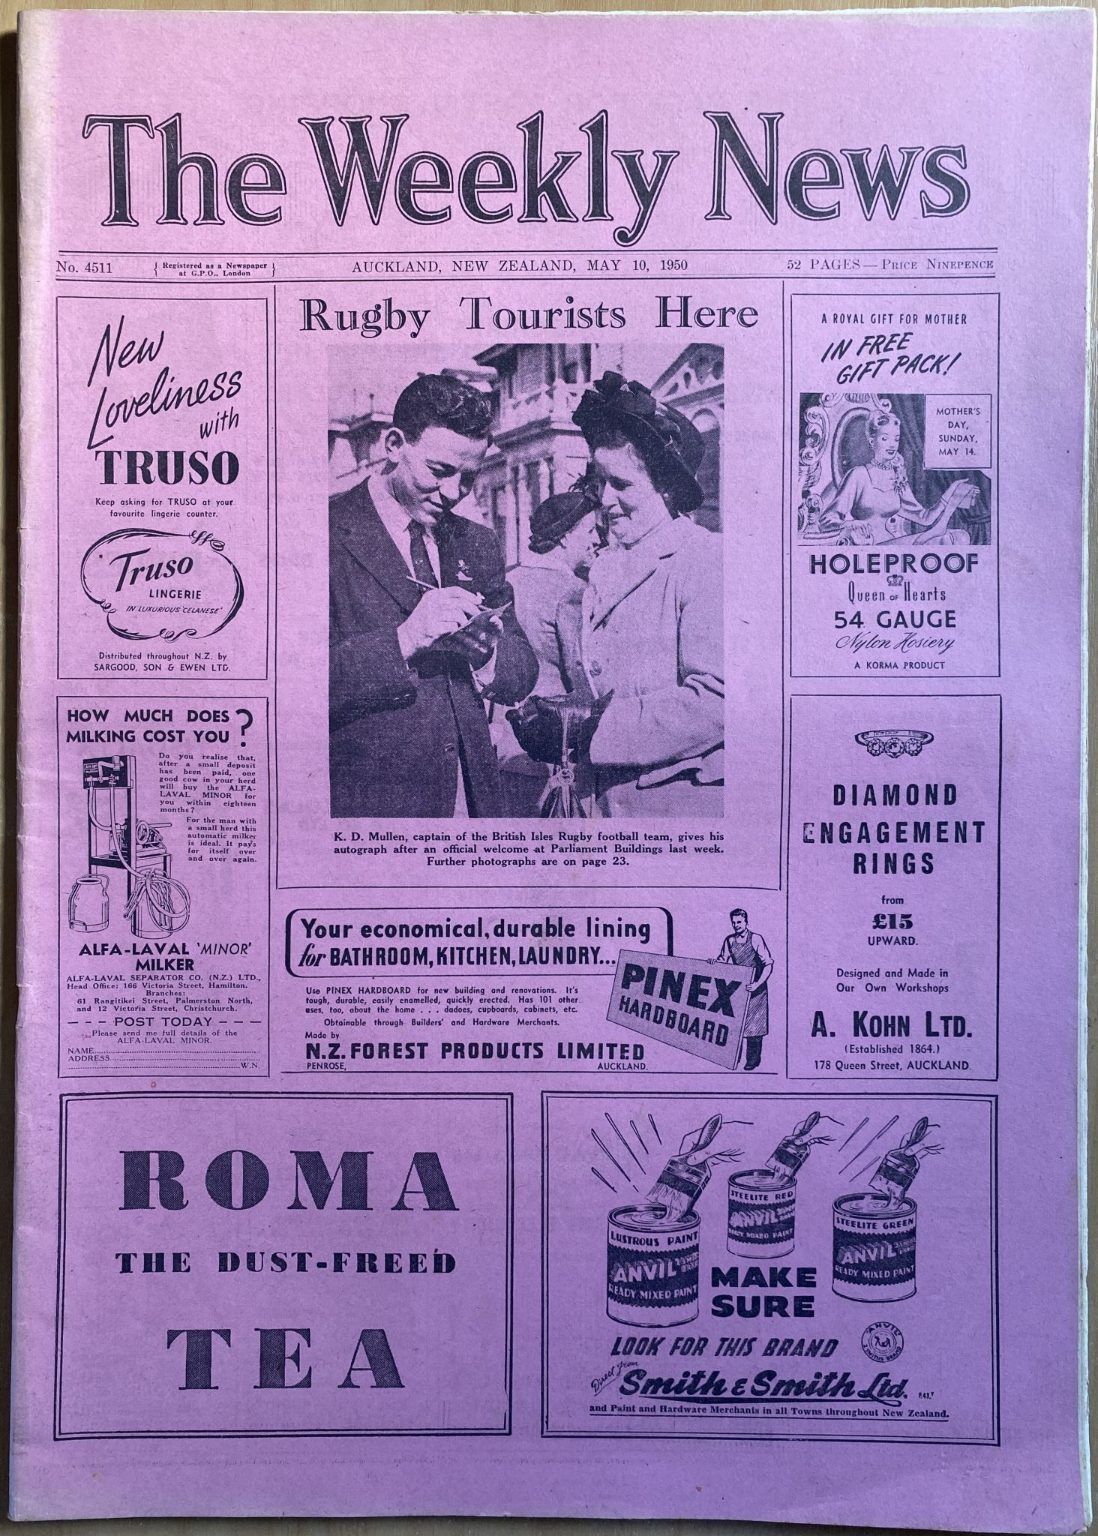 OLD NEWSPAPER: The Weekly News, No. 4511, 10 May 1950